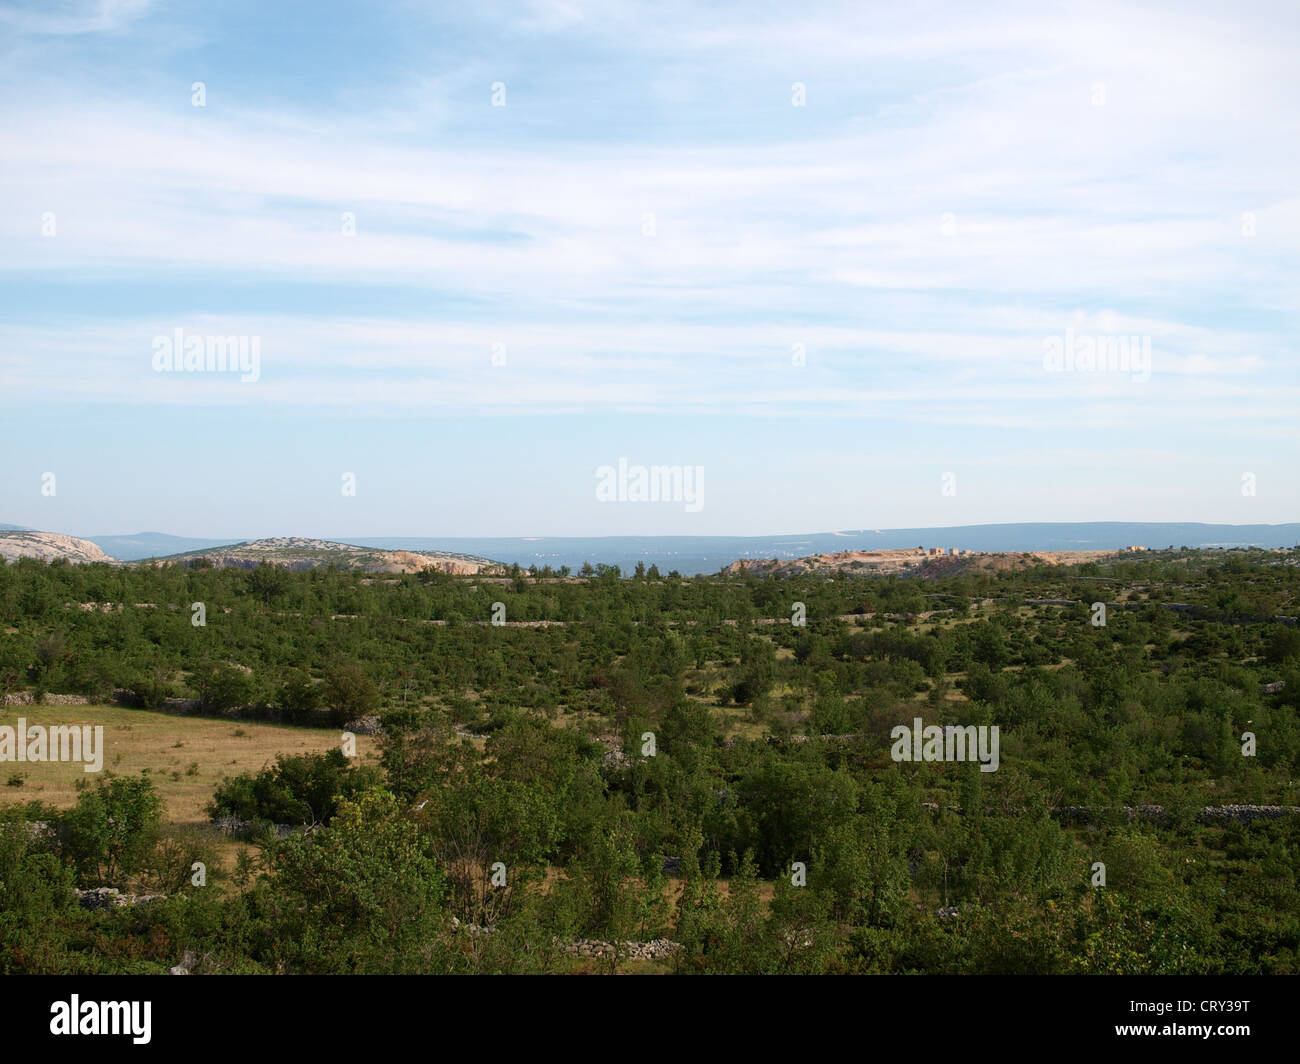 Scenery on top of a Mediterranean island with bright blue sky Stock Photo